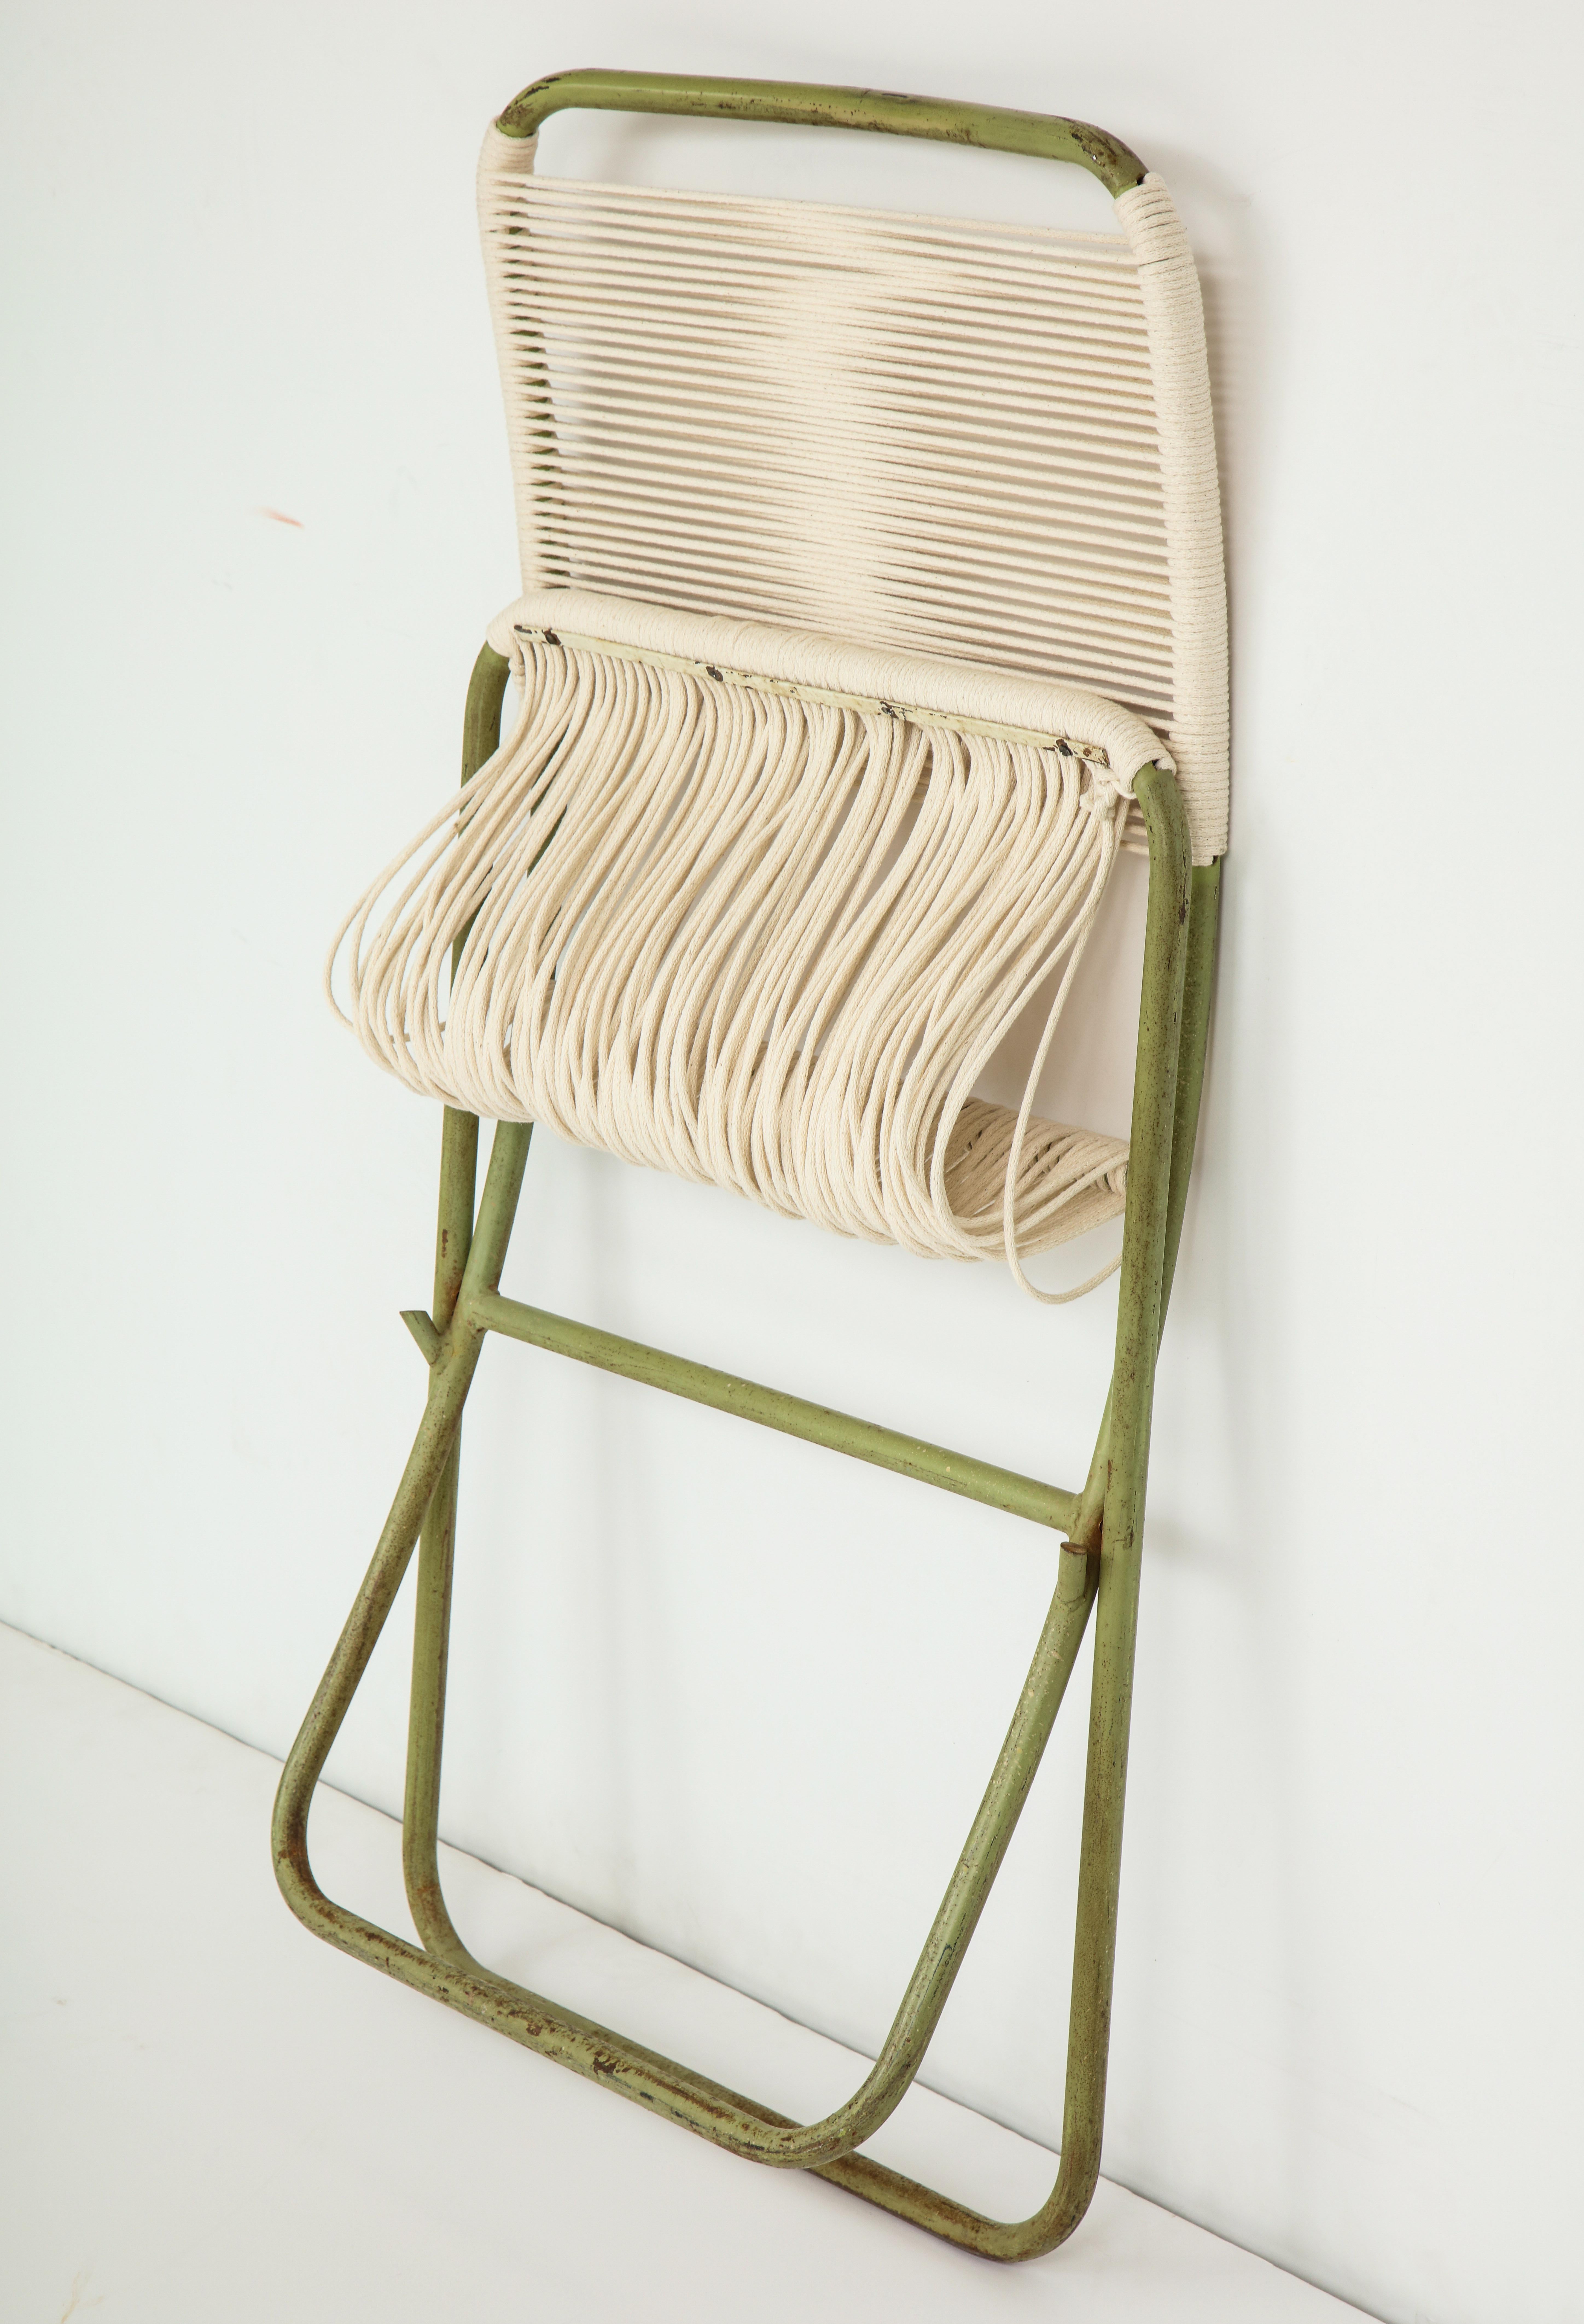 Exceedingly rare, sculpturally resonant Greta Grossman indoor/outdoor folding chairs, of painted tubular steel and cotton cord, produced in California circa 1949 either by Barker Brothers or Modern Color, Inc. The chaise and lounge versions of this